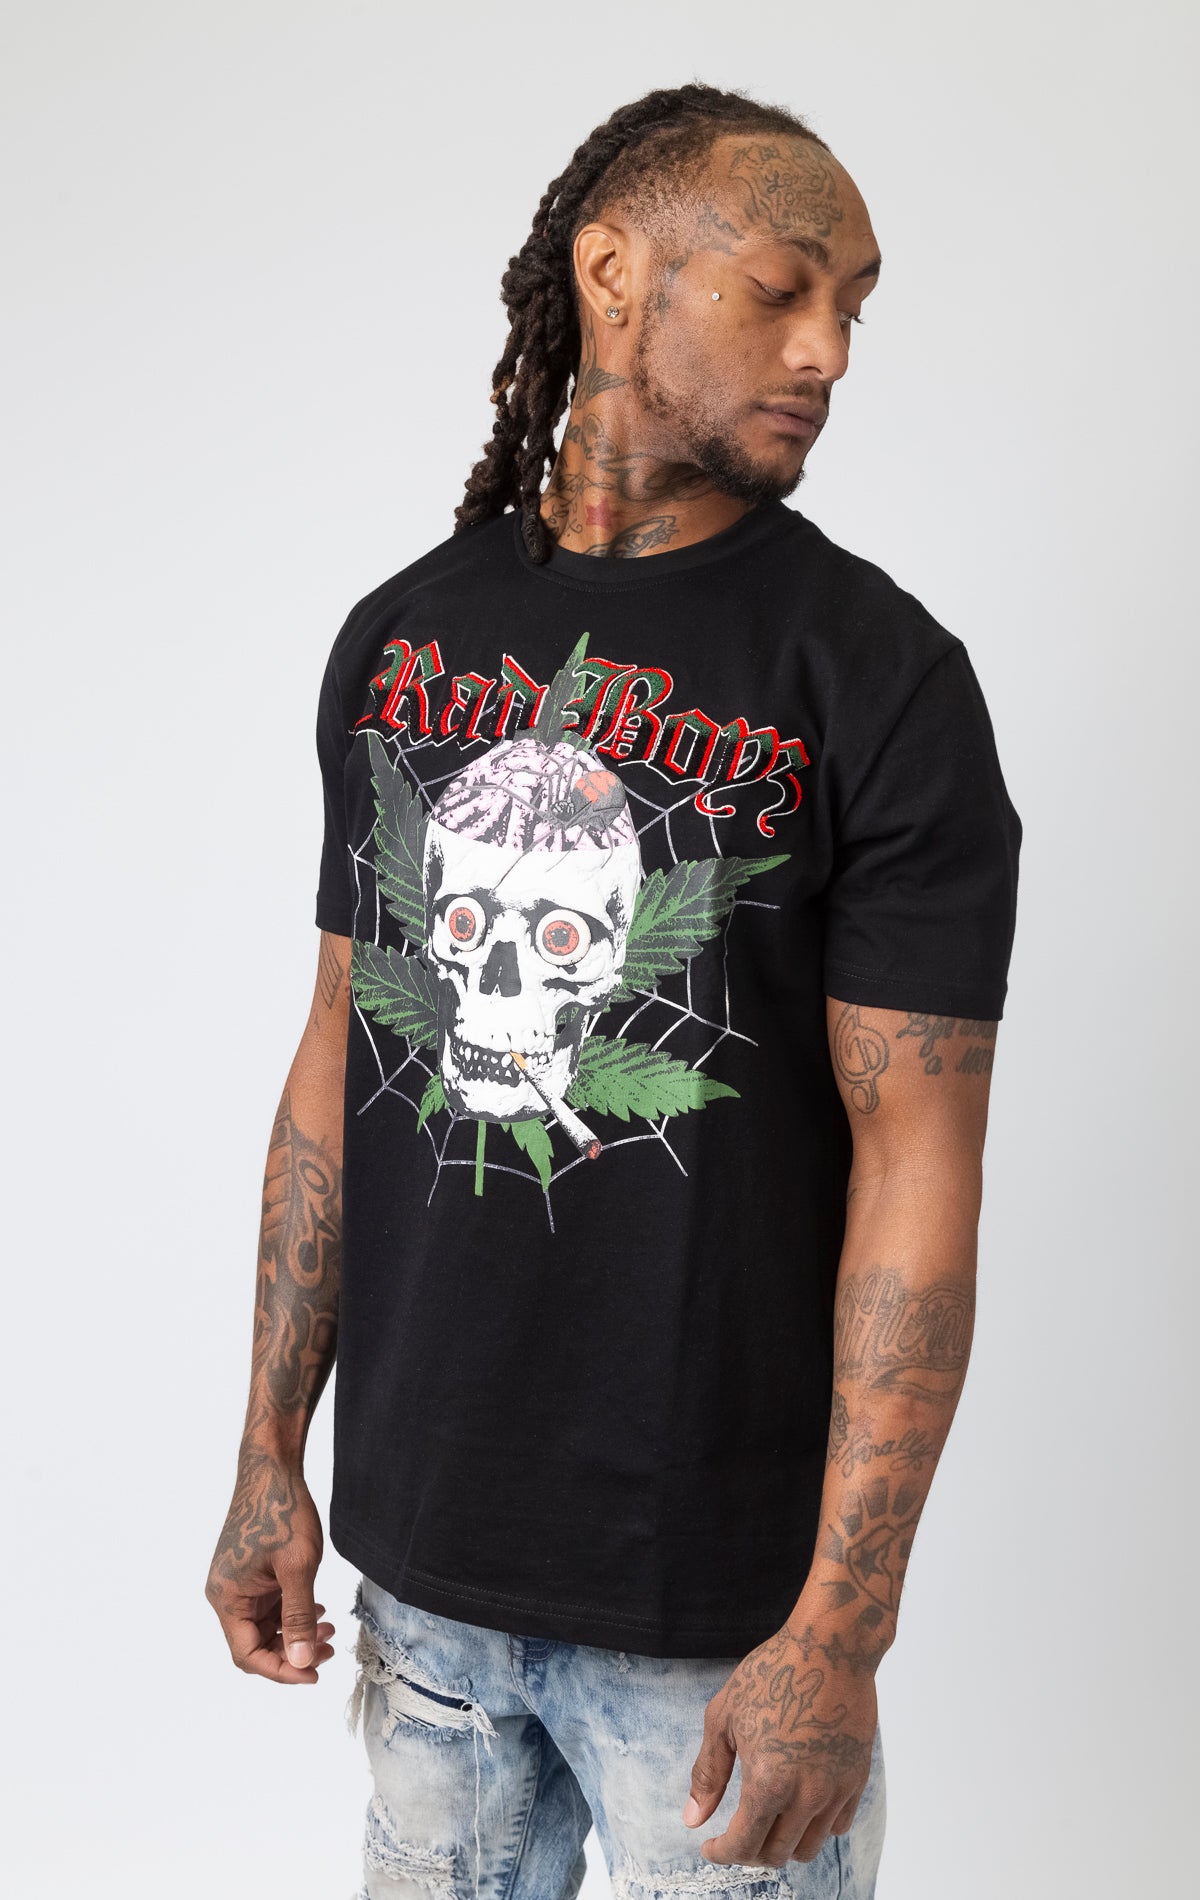 Featuring the RB-KT-017 Rad Boyz T-Shirt in sleek black, the Brain Dead Tour edition is a must-have for any fashion-forward and edgy individual. Crafted with top-notch materials, this comfy and true-to-size shirt is ideal for showcasing your one-of-a-kind style.